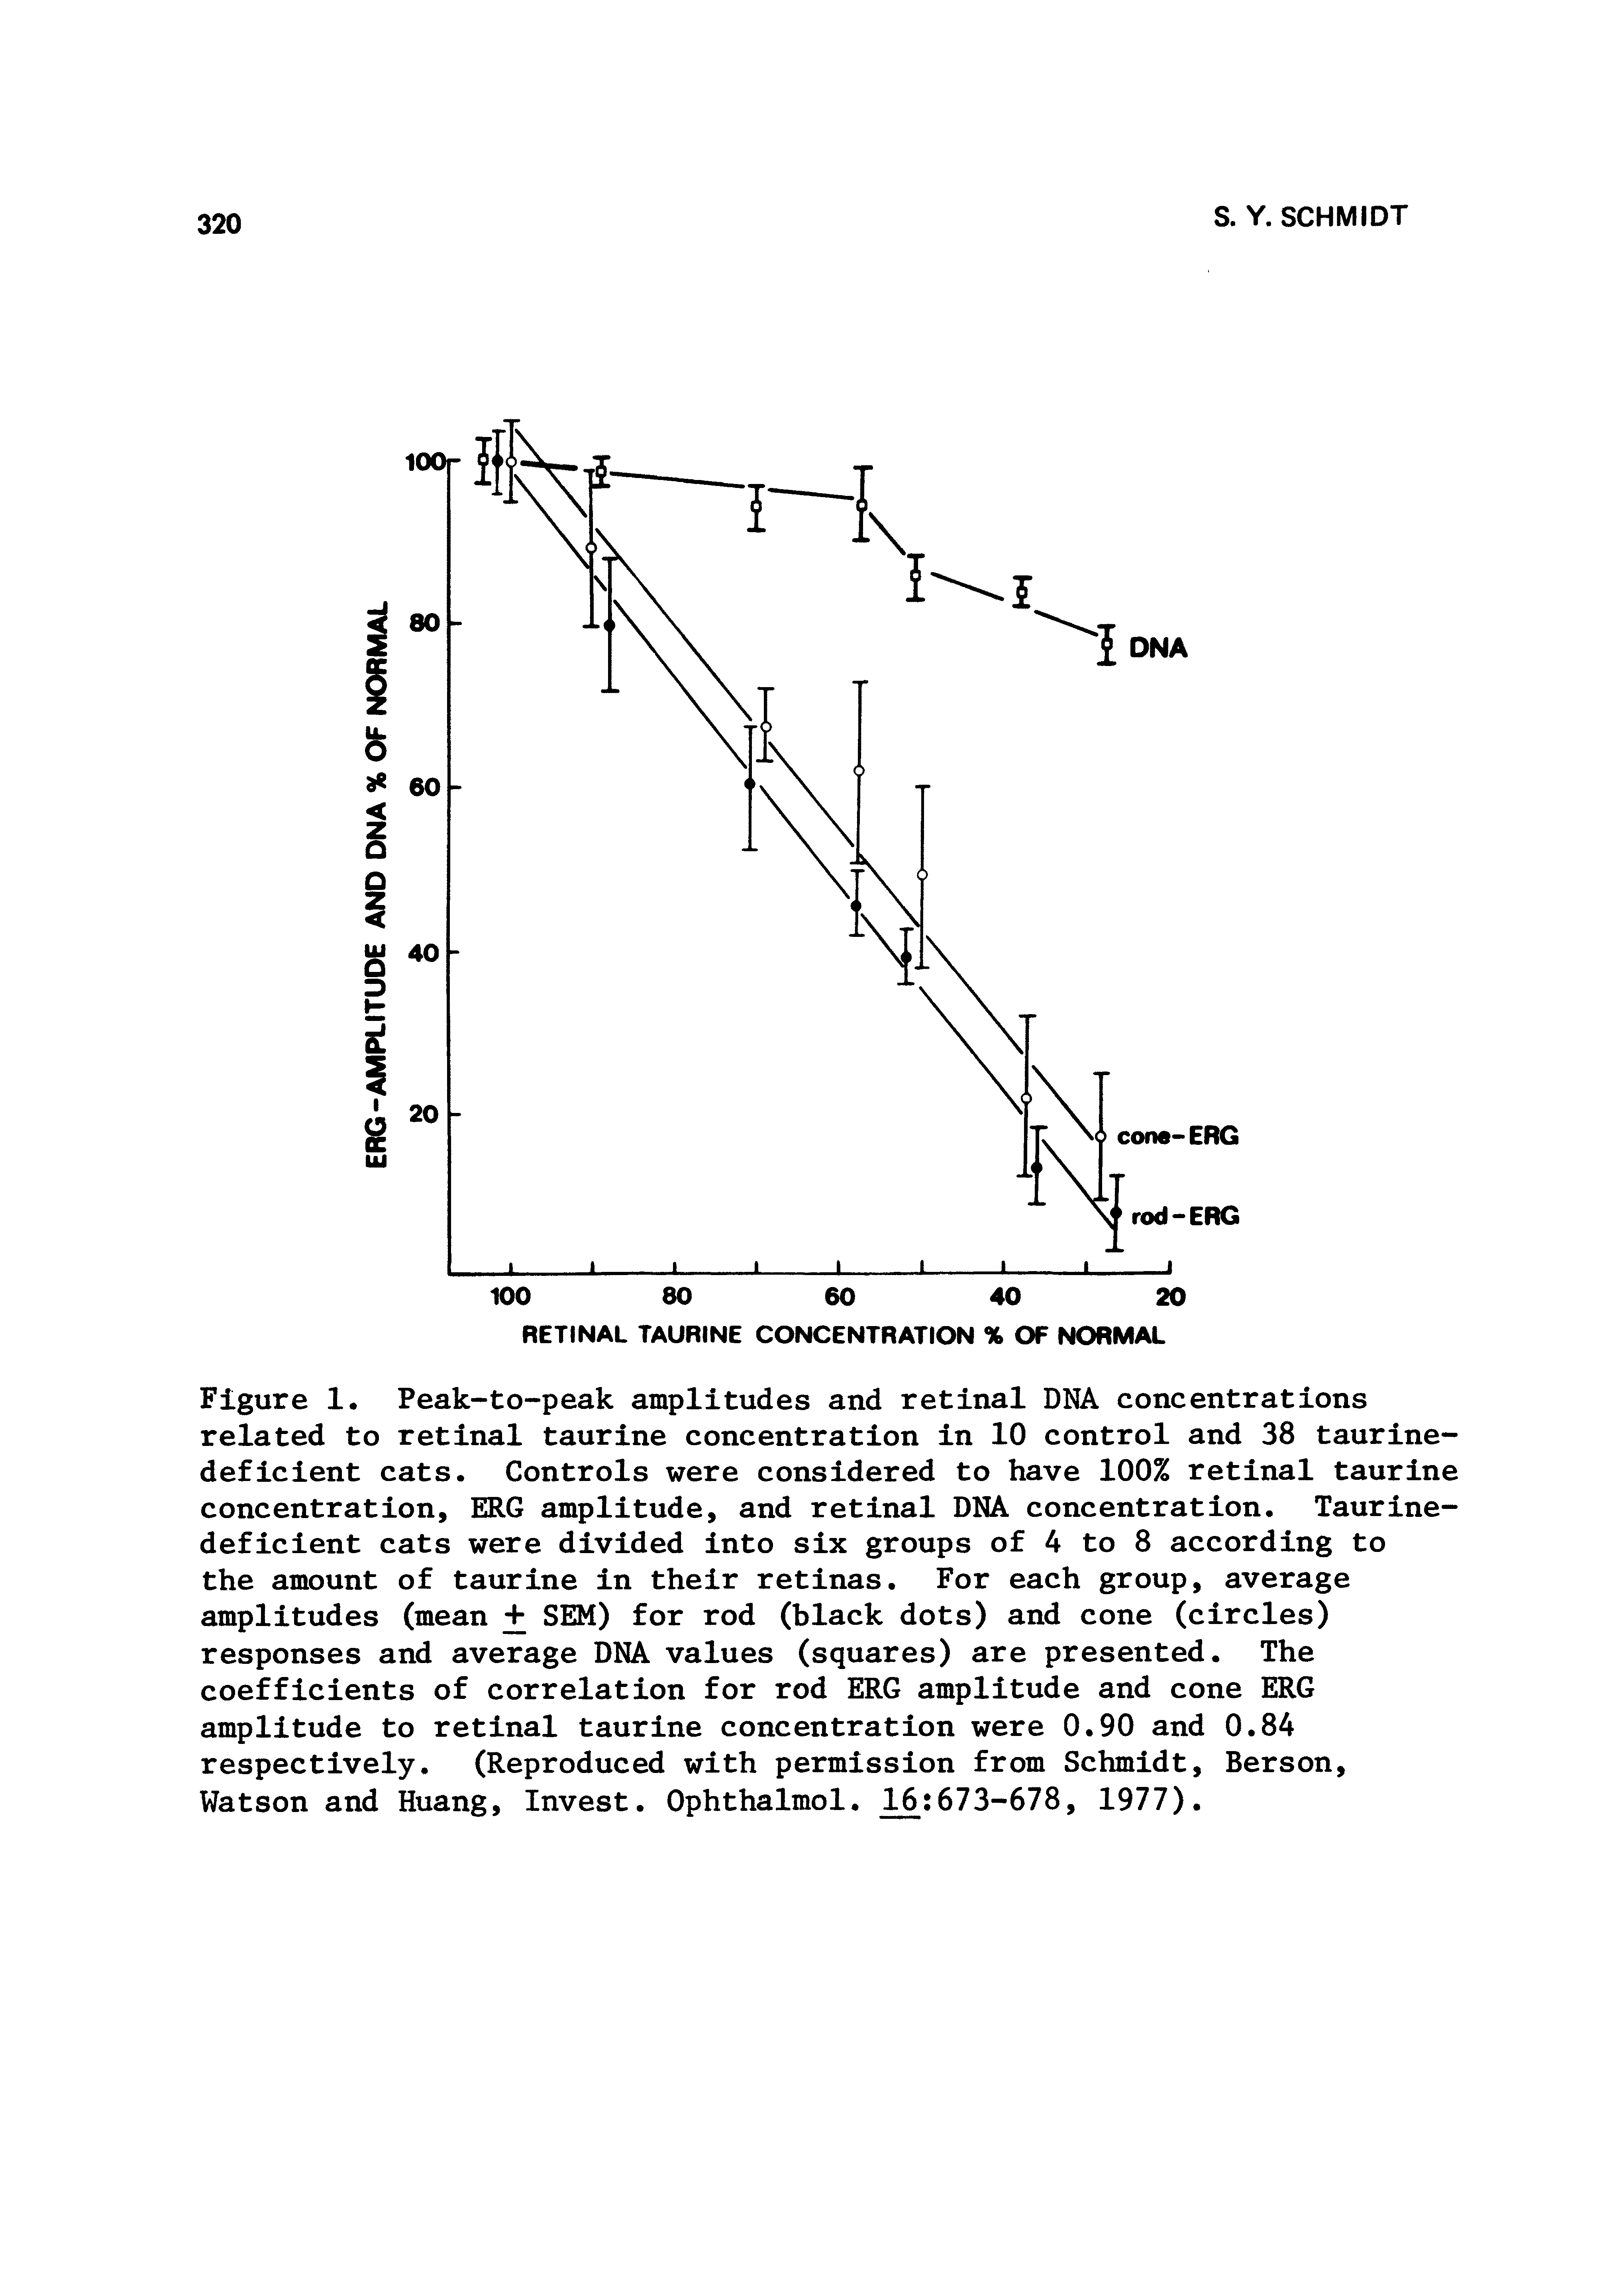 Figure 1. Peak-to-peak amplitudes and retinal DNA concentrations related to retinal taurine concentration in 10 control and 38 taurine-deficient cats. Controls were considered to have 100% retinal taurine concentration, ERG amplitude, and retinal DNA concentration. Taurine-deficient cats were divided into six groups of 4 to 8 according to the amount of taurine in their retinas. For each group, average amplitudes (mean + SEM) for rod (black dots) and cone (circles) responses and average DNA values (squares) are presented. The coefficients of correlation for rod ERG amplitude and cone ERG amplitude to retinal taurine concentration were 0.90 and 0.84 respectively. (Reproduced with permission from Schmidt, Berson,...